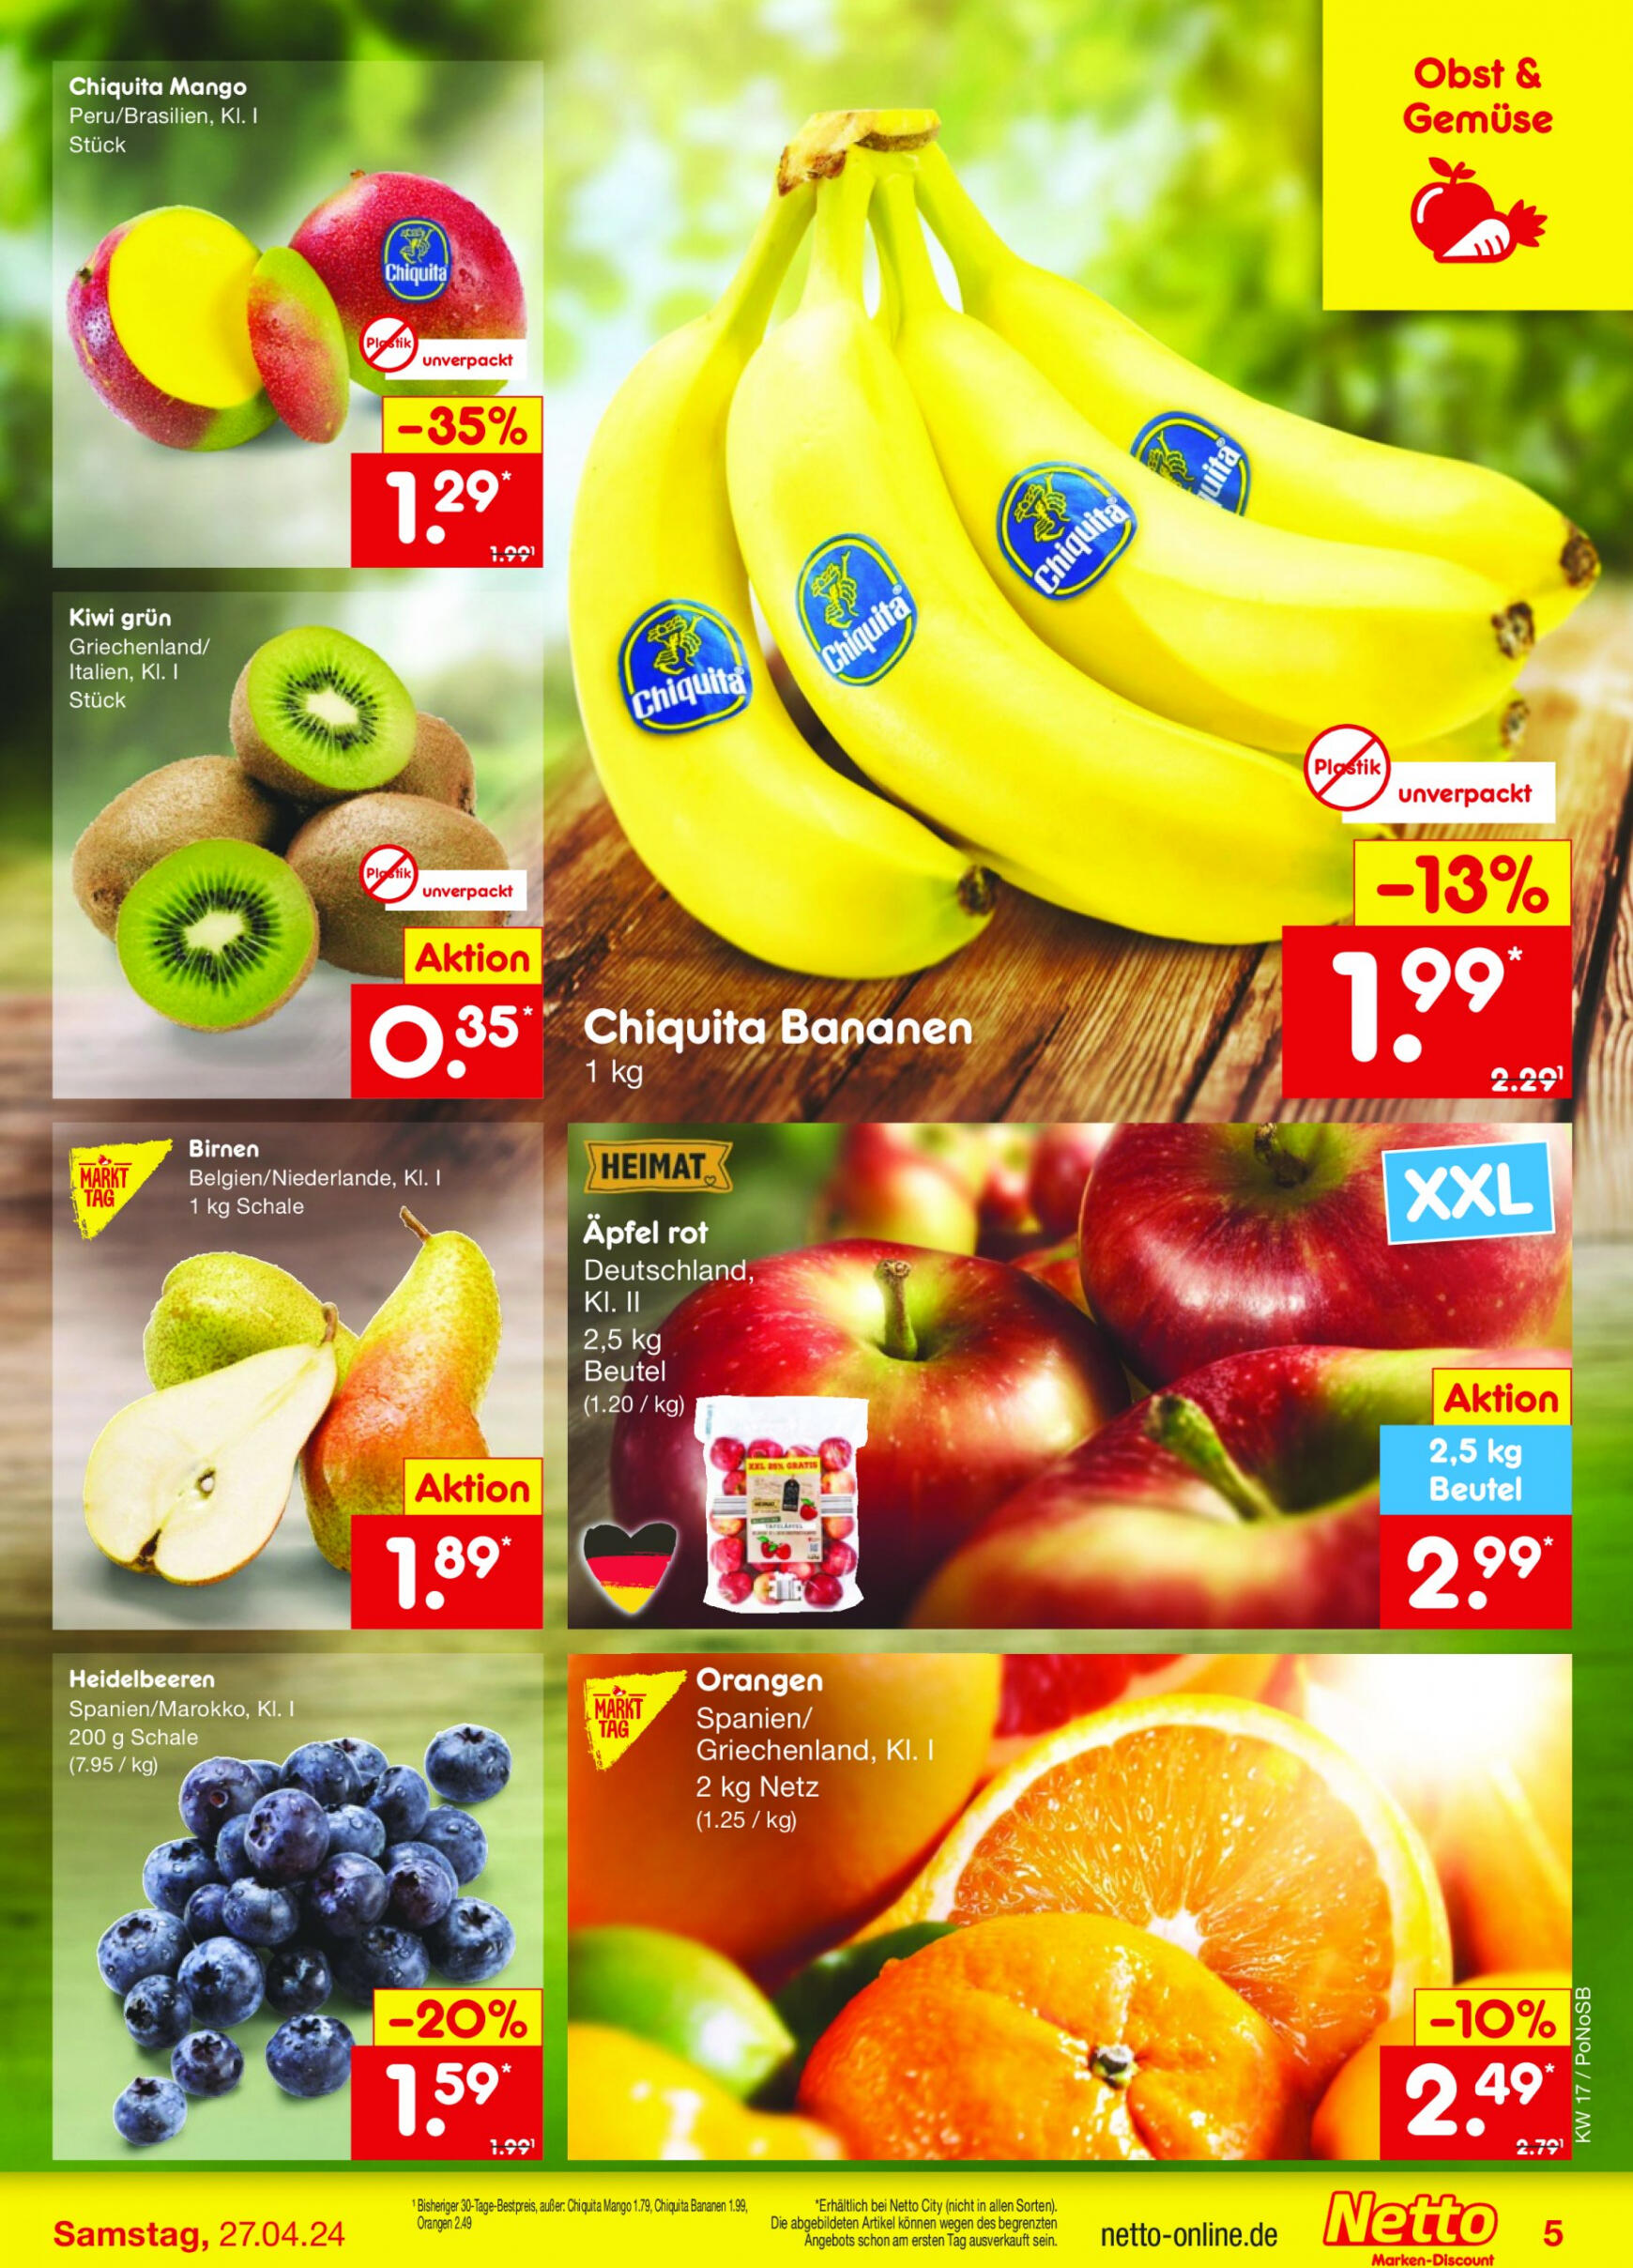 netto - Flyer Netto aktuell 22.04. - 27.04. - page: 5